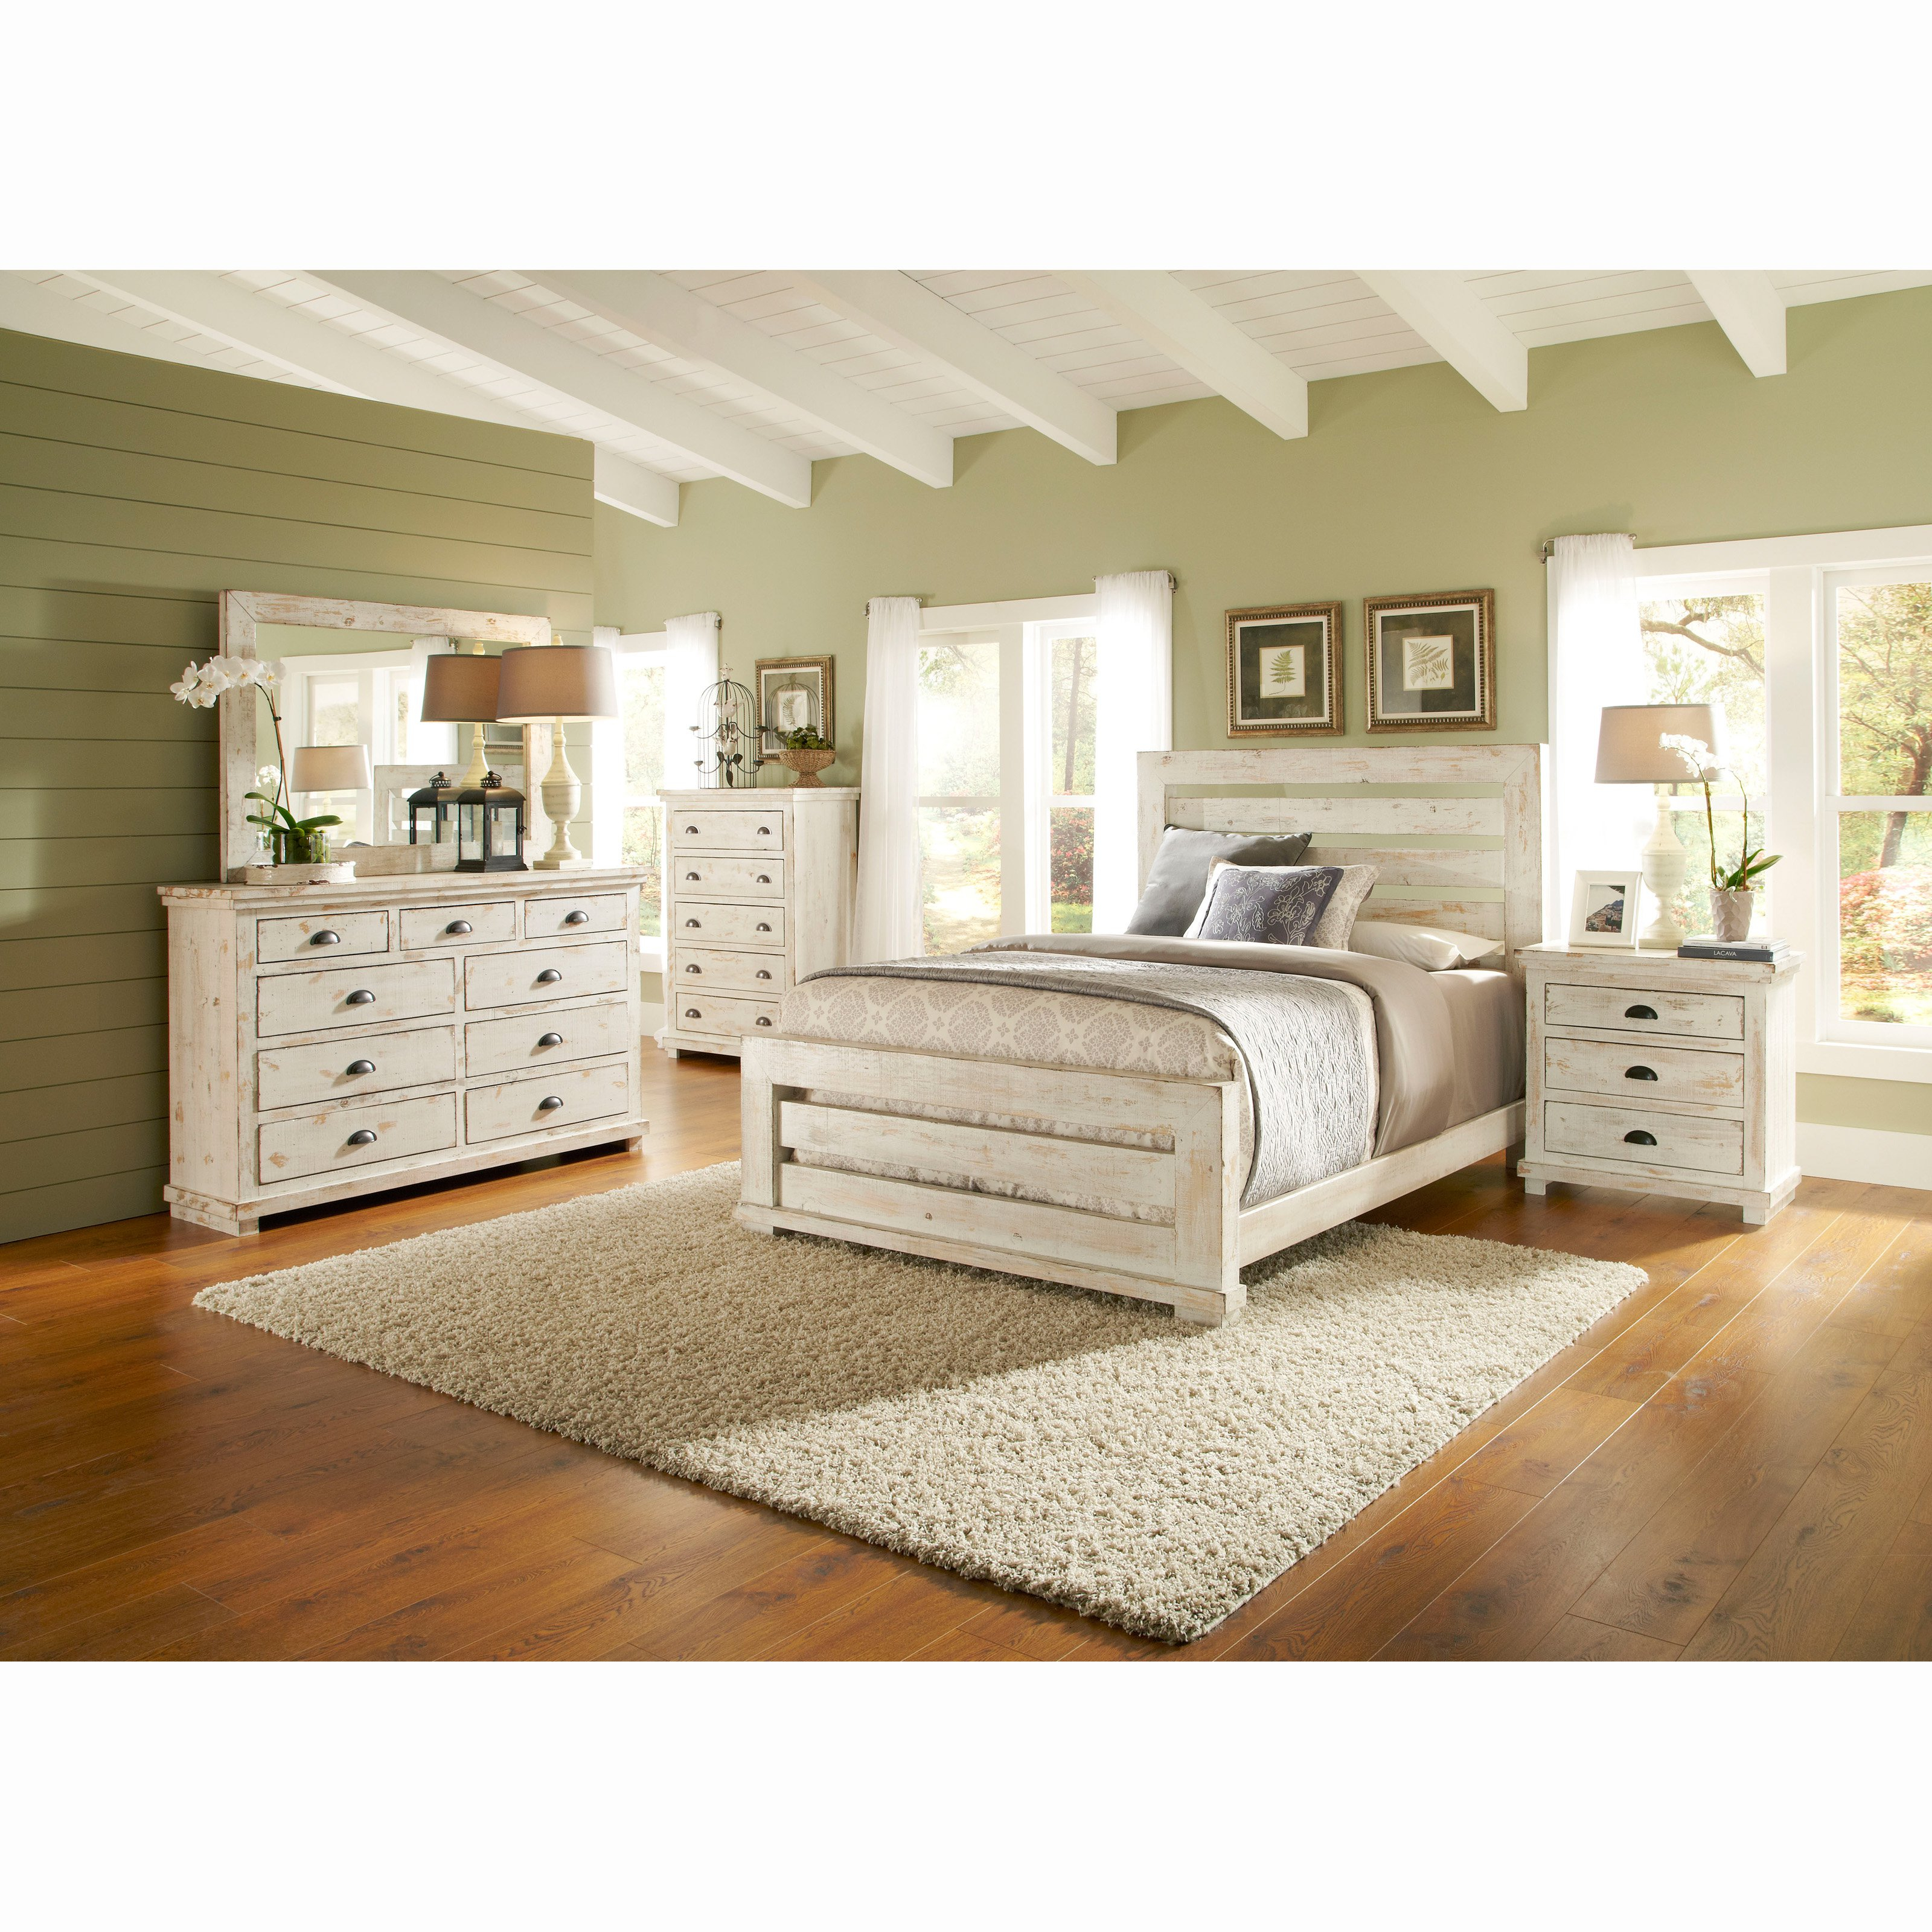 Progressive Furniture Willow Slat Panel Bed with regard to dimensions 3200 X 3200